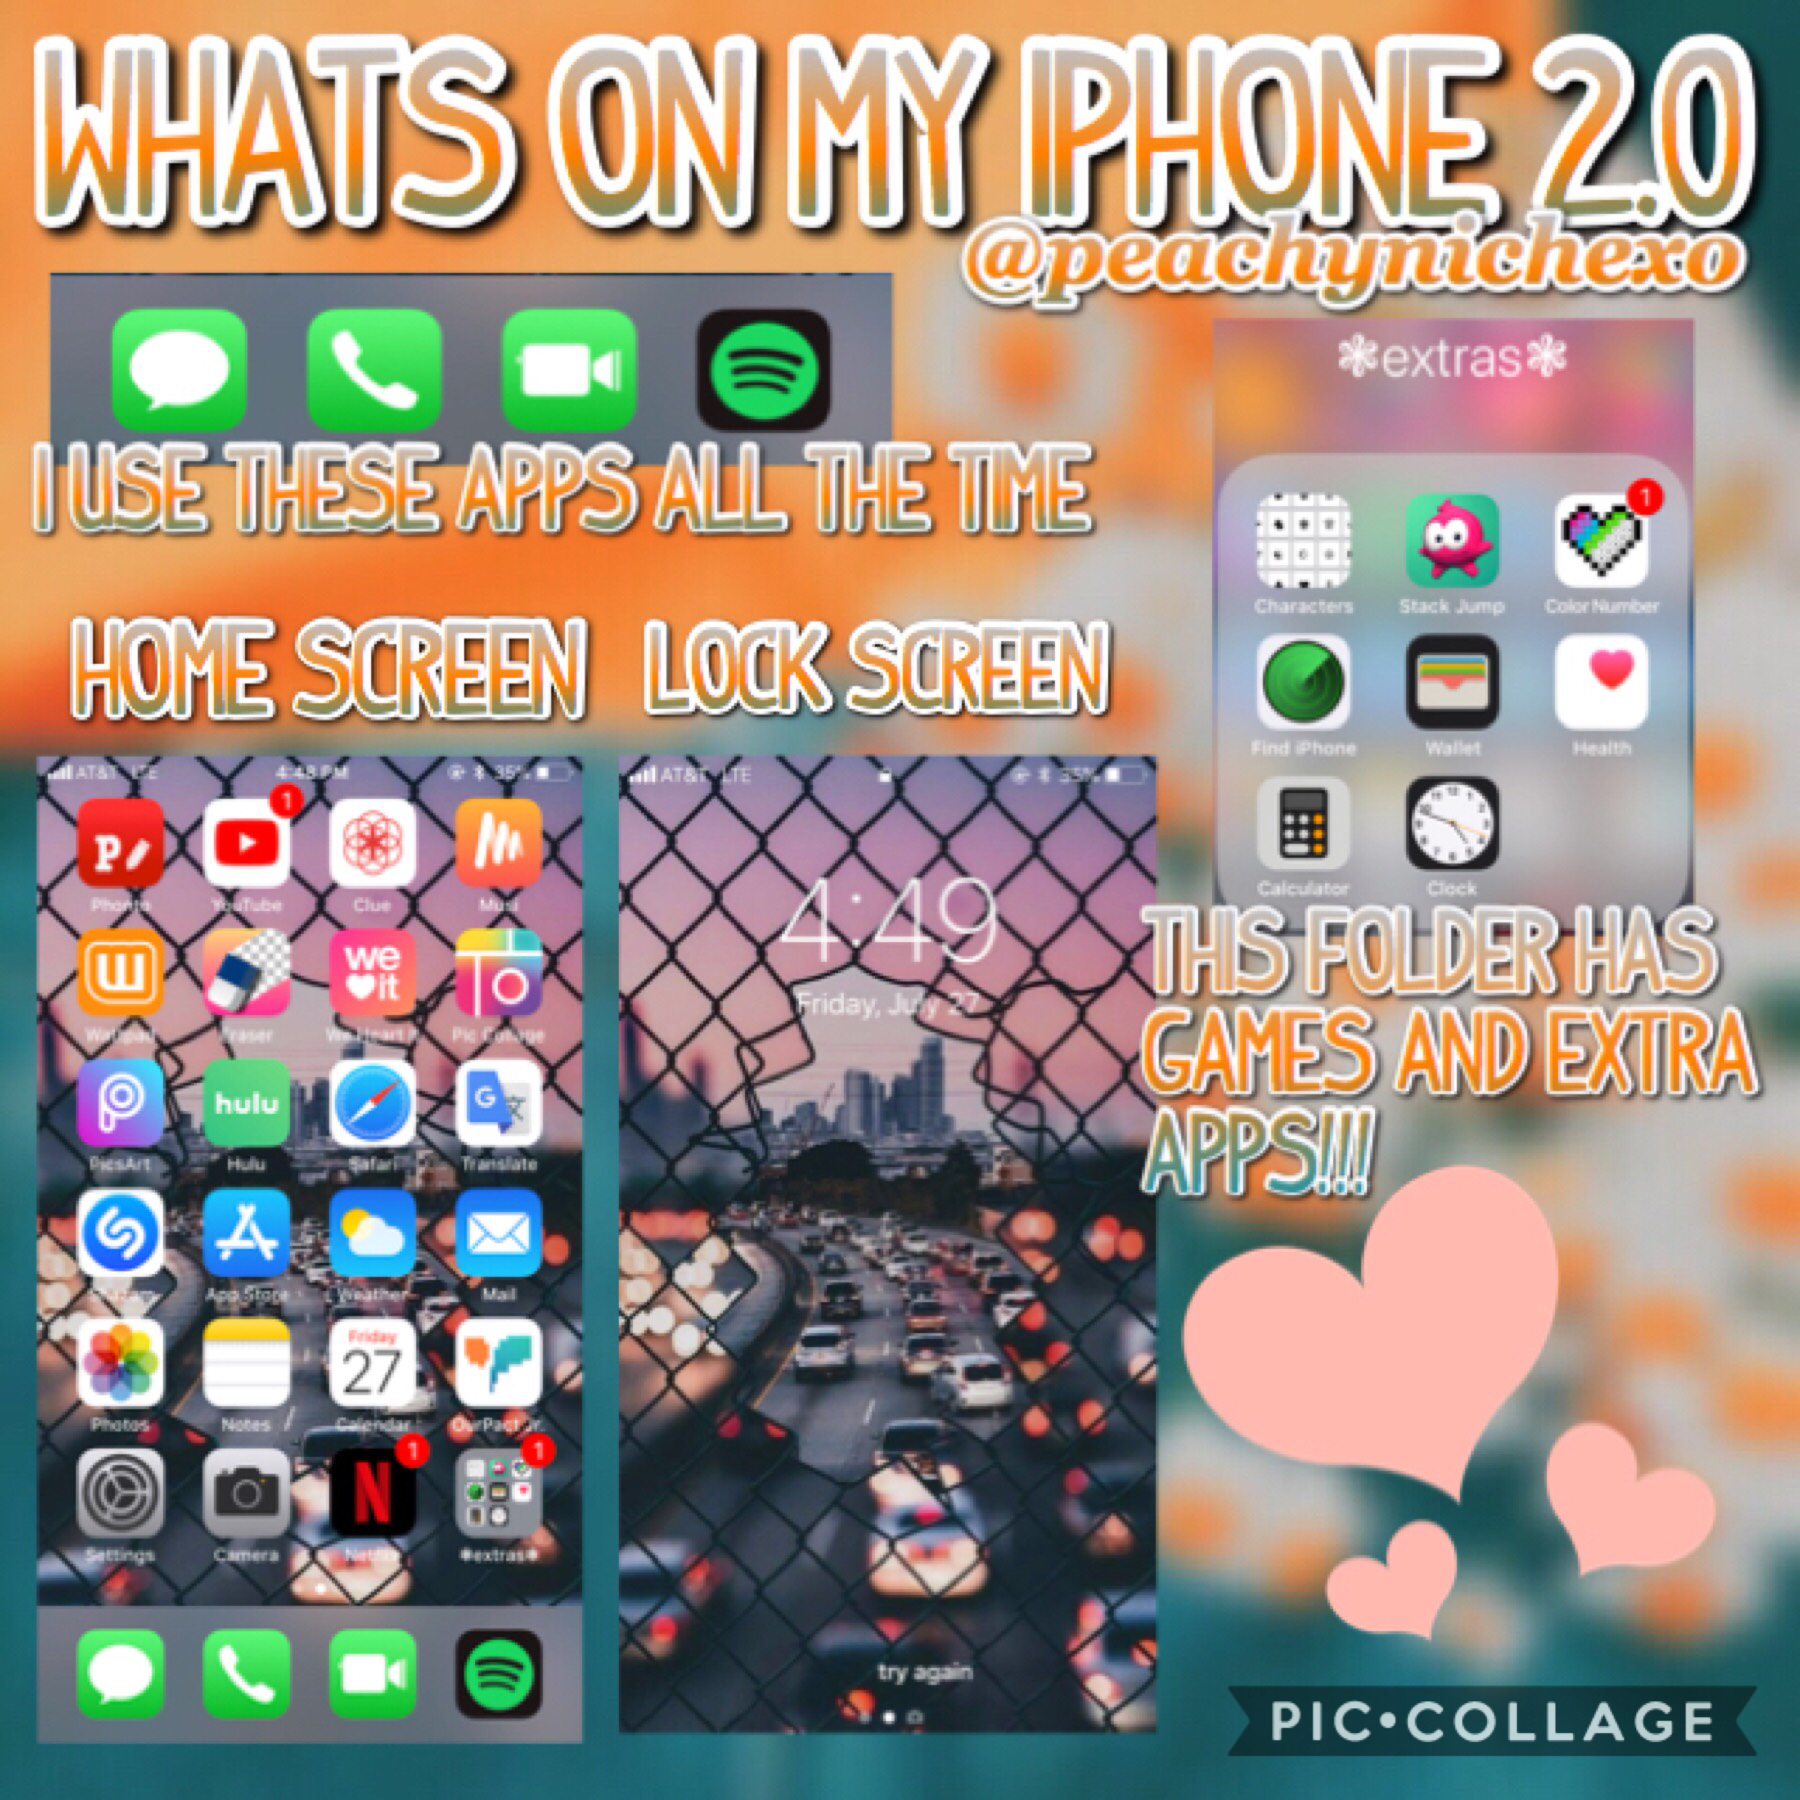 ♡Tap




peachyniche::❃
Hey Loves!!Sorry I was really busy but I’m back with new niche memes and edits.Goodbye my loves🧡💙

—date:7/27/18
—time:5:16pm
—qotd:do u want a face reveal??
::❃
